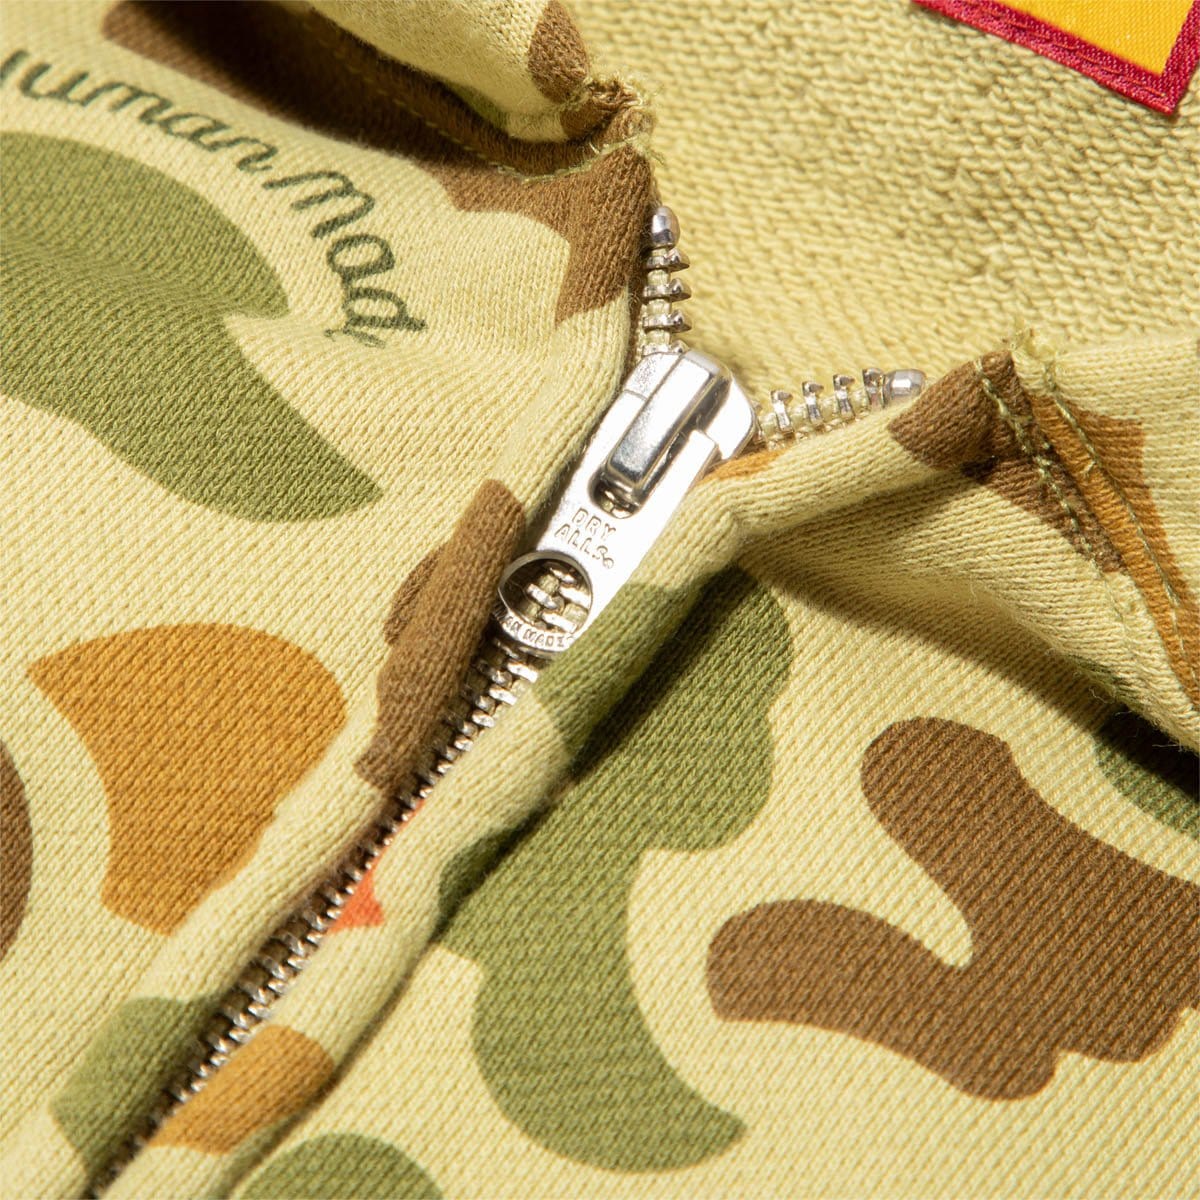 Human Made Duck Camo Pullover Jacket